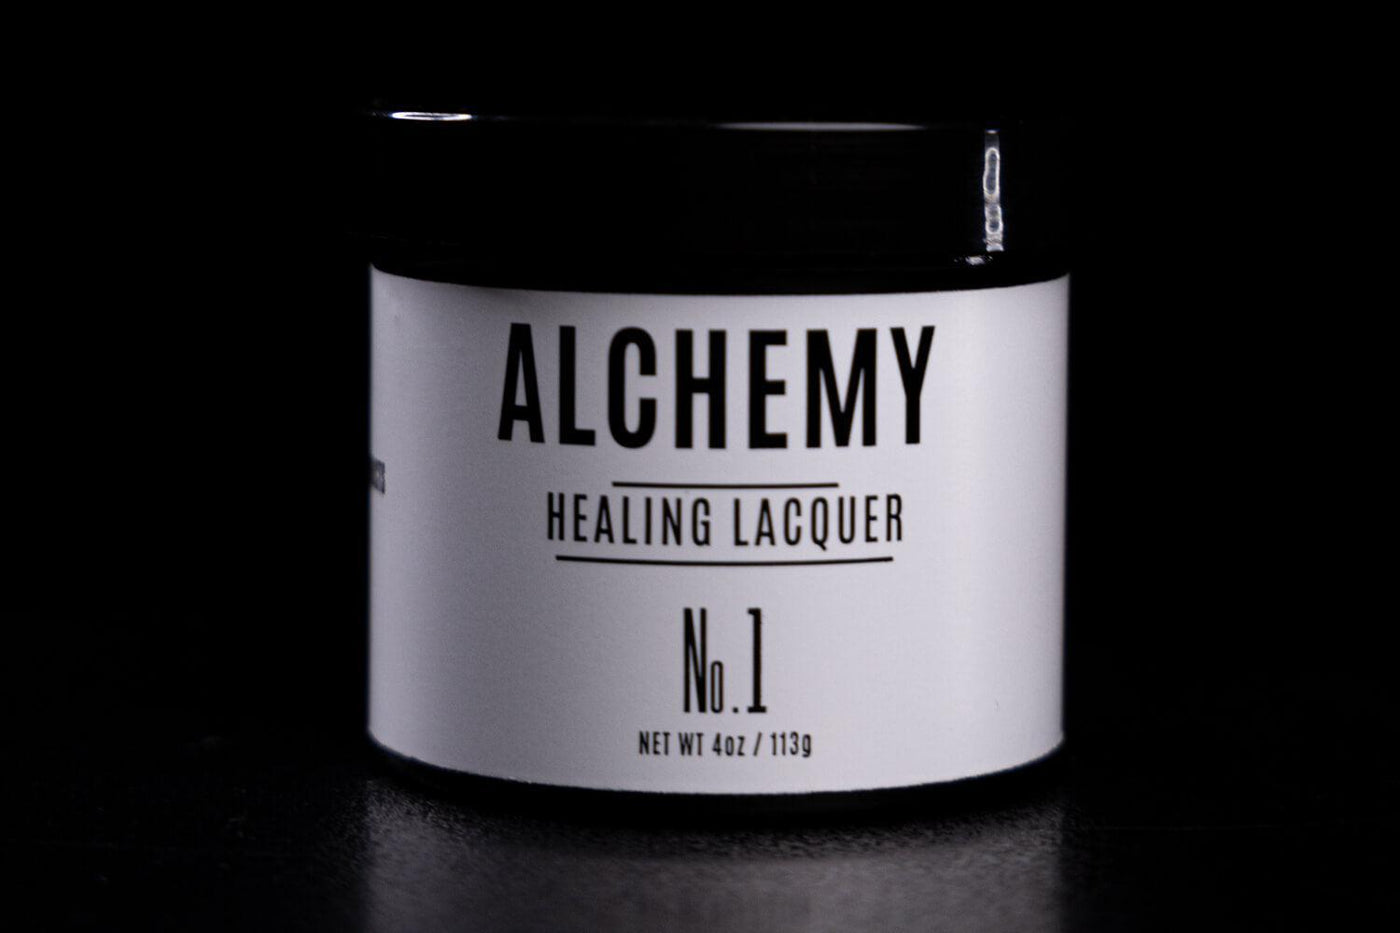 ALCHEMY- Healing Lacquer #1 - Aftercare - Pro Smp Supplies Inc